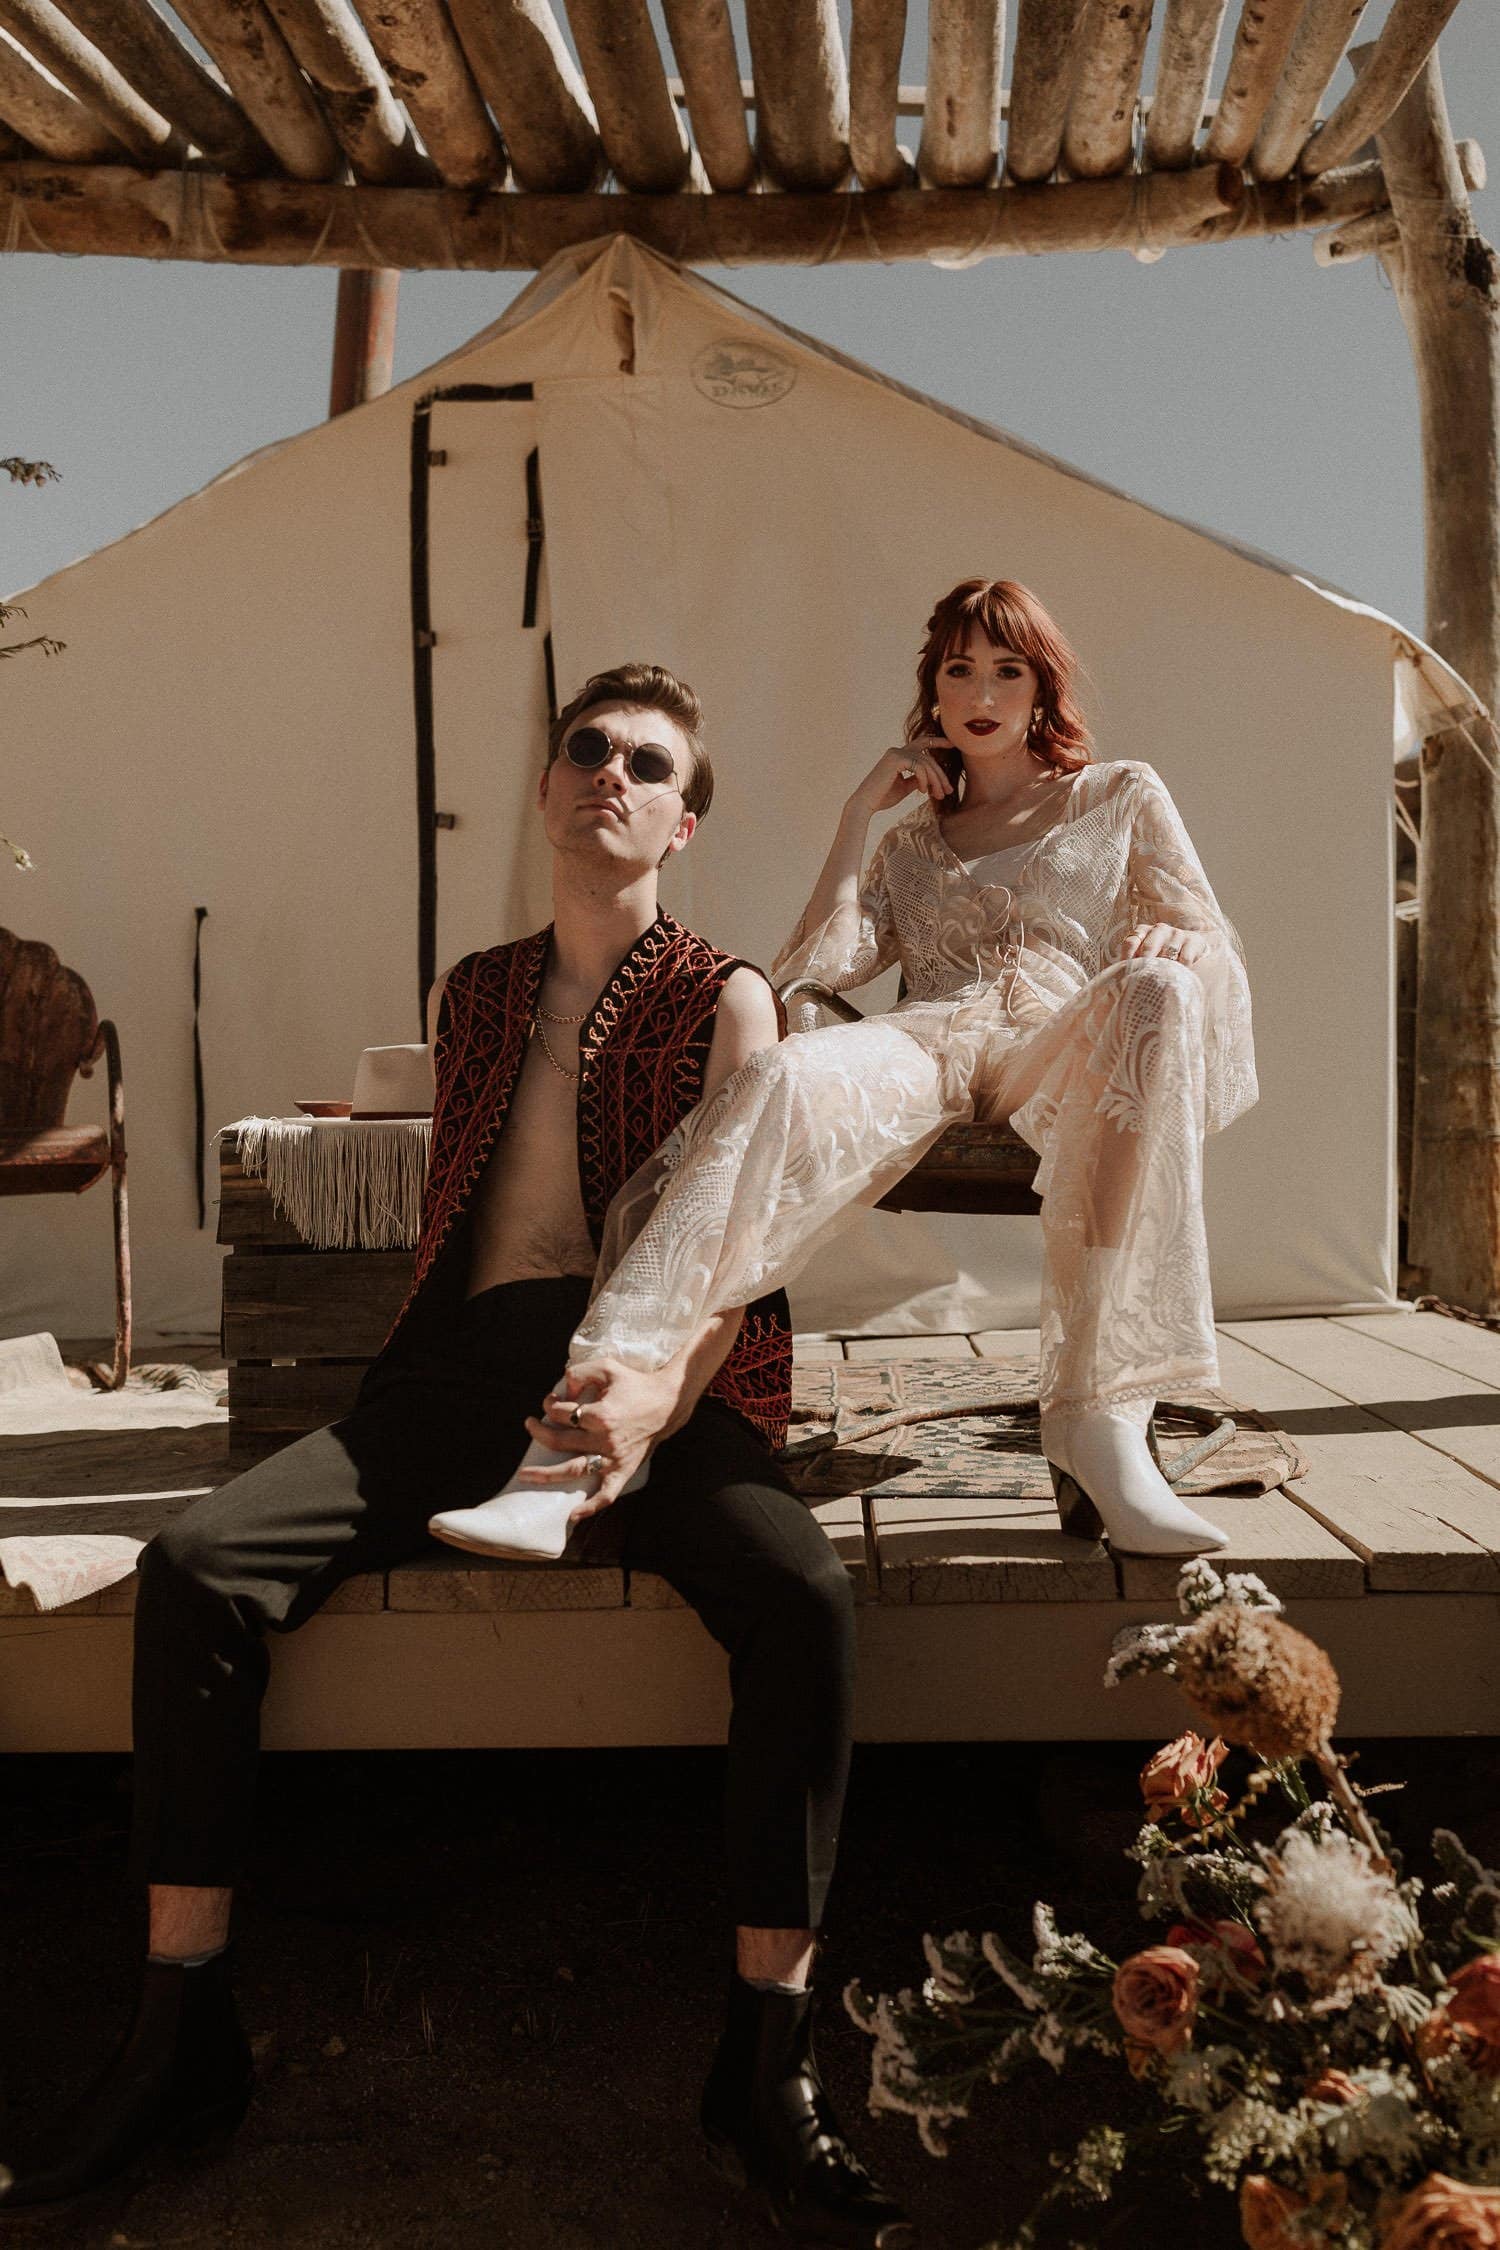 Edgy elopement couple sit outside their desert yurt before their elopement ceremony. Bride wears a bridal jumpsuit and the groom looks cool in his sunglasses